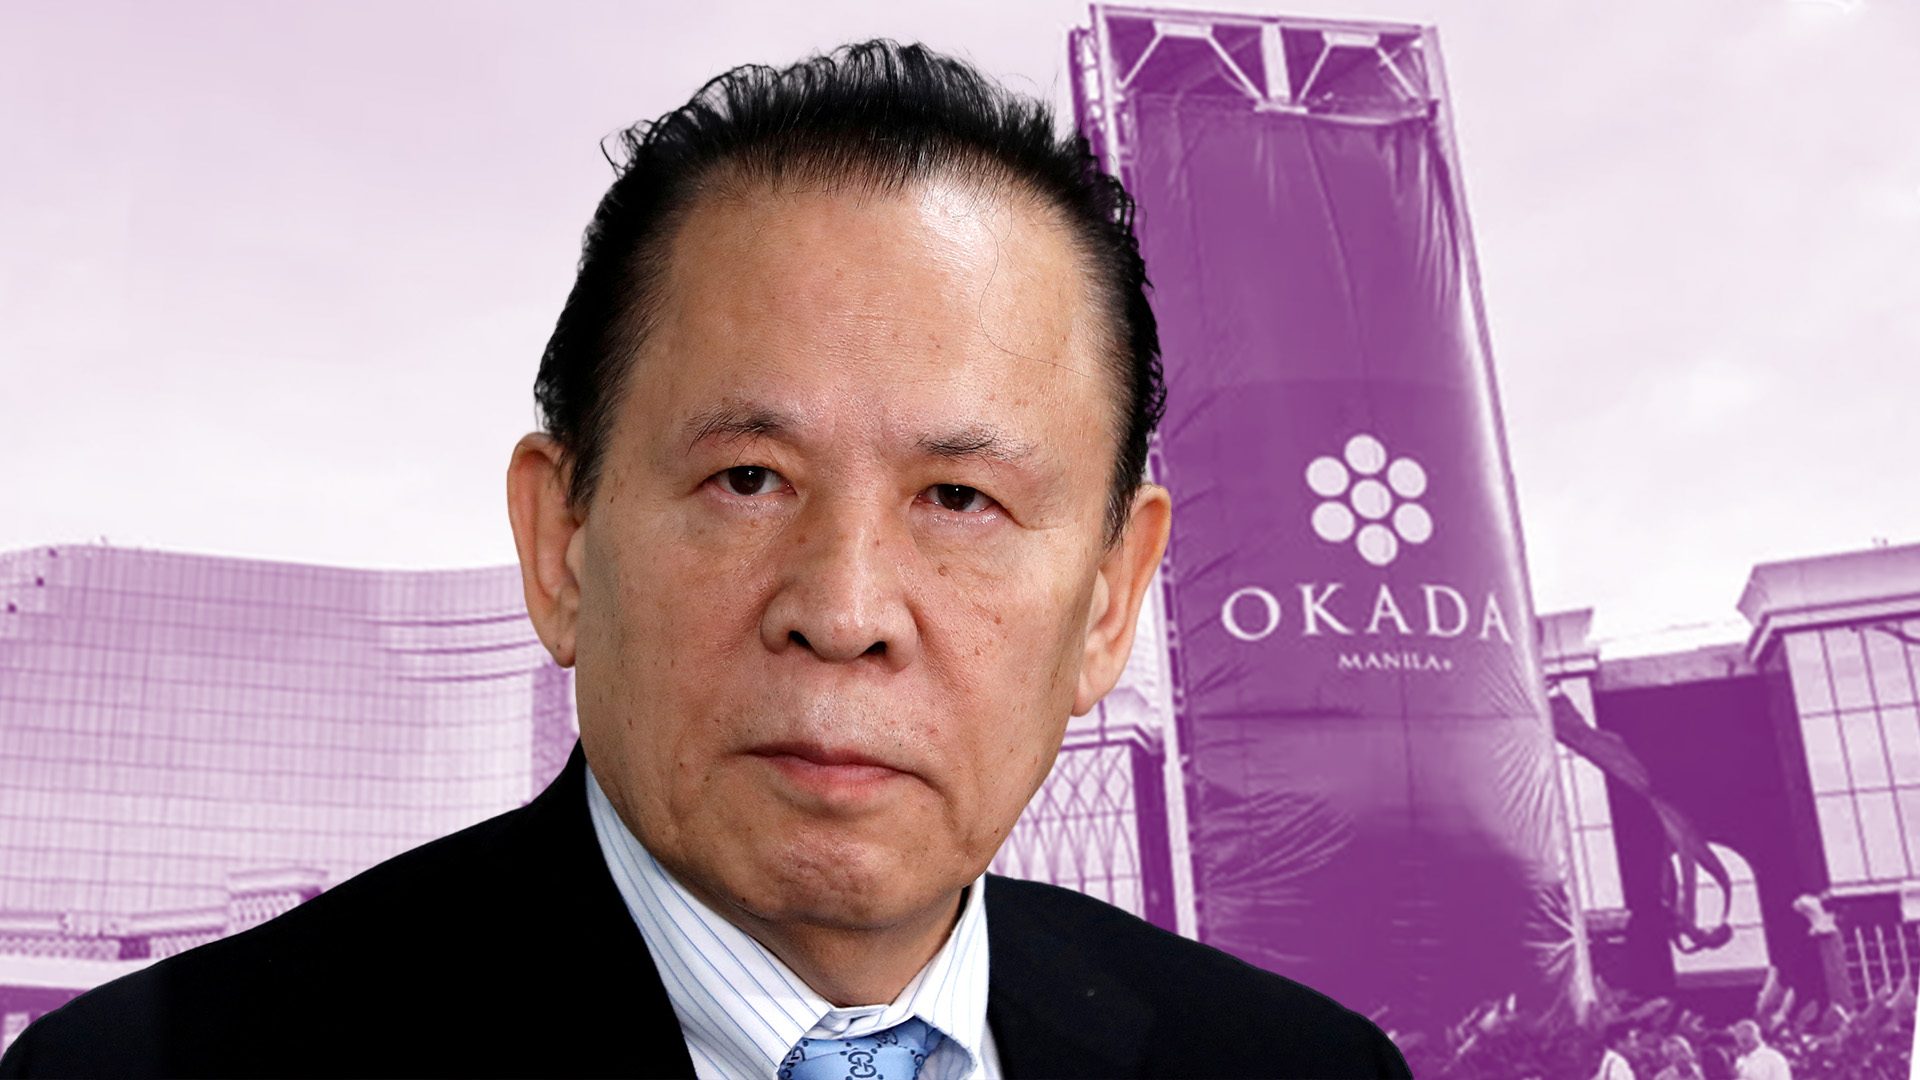 Japanese tycoon Kazuo Okada officially out of Okada Manila after SC ruling